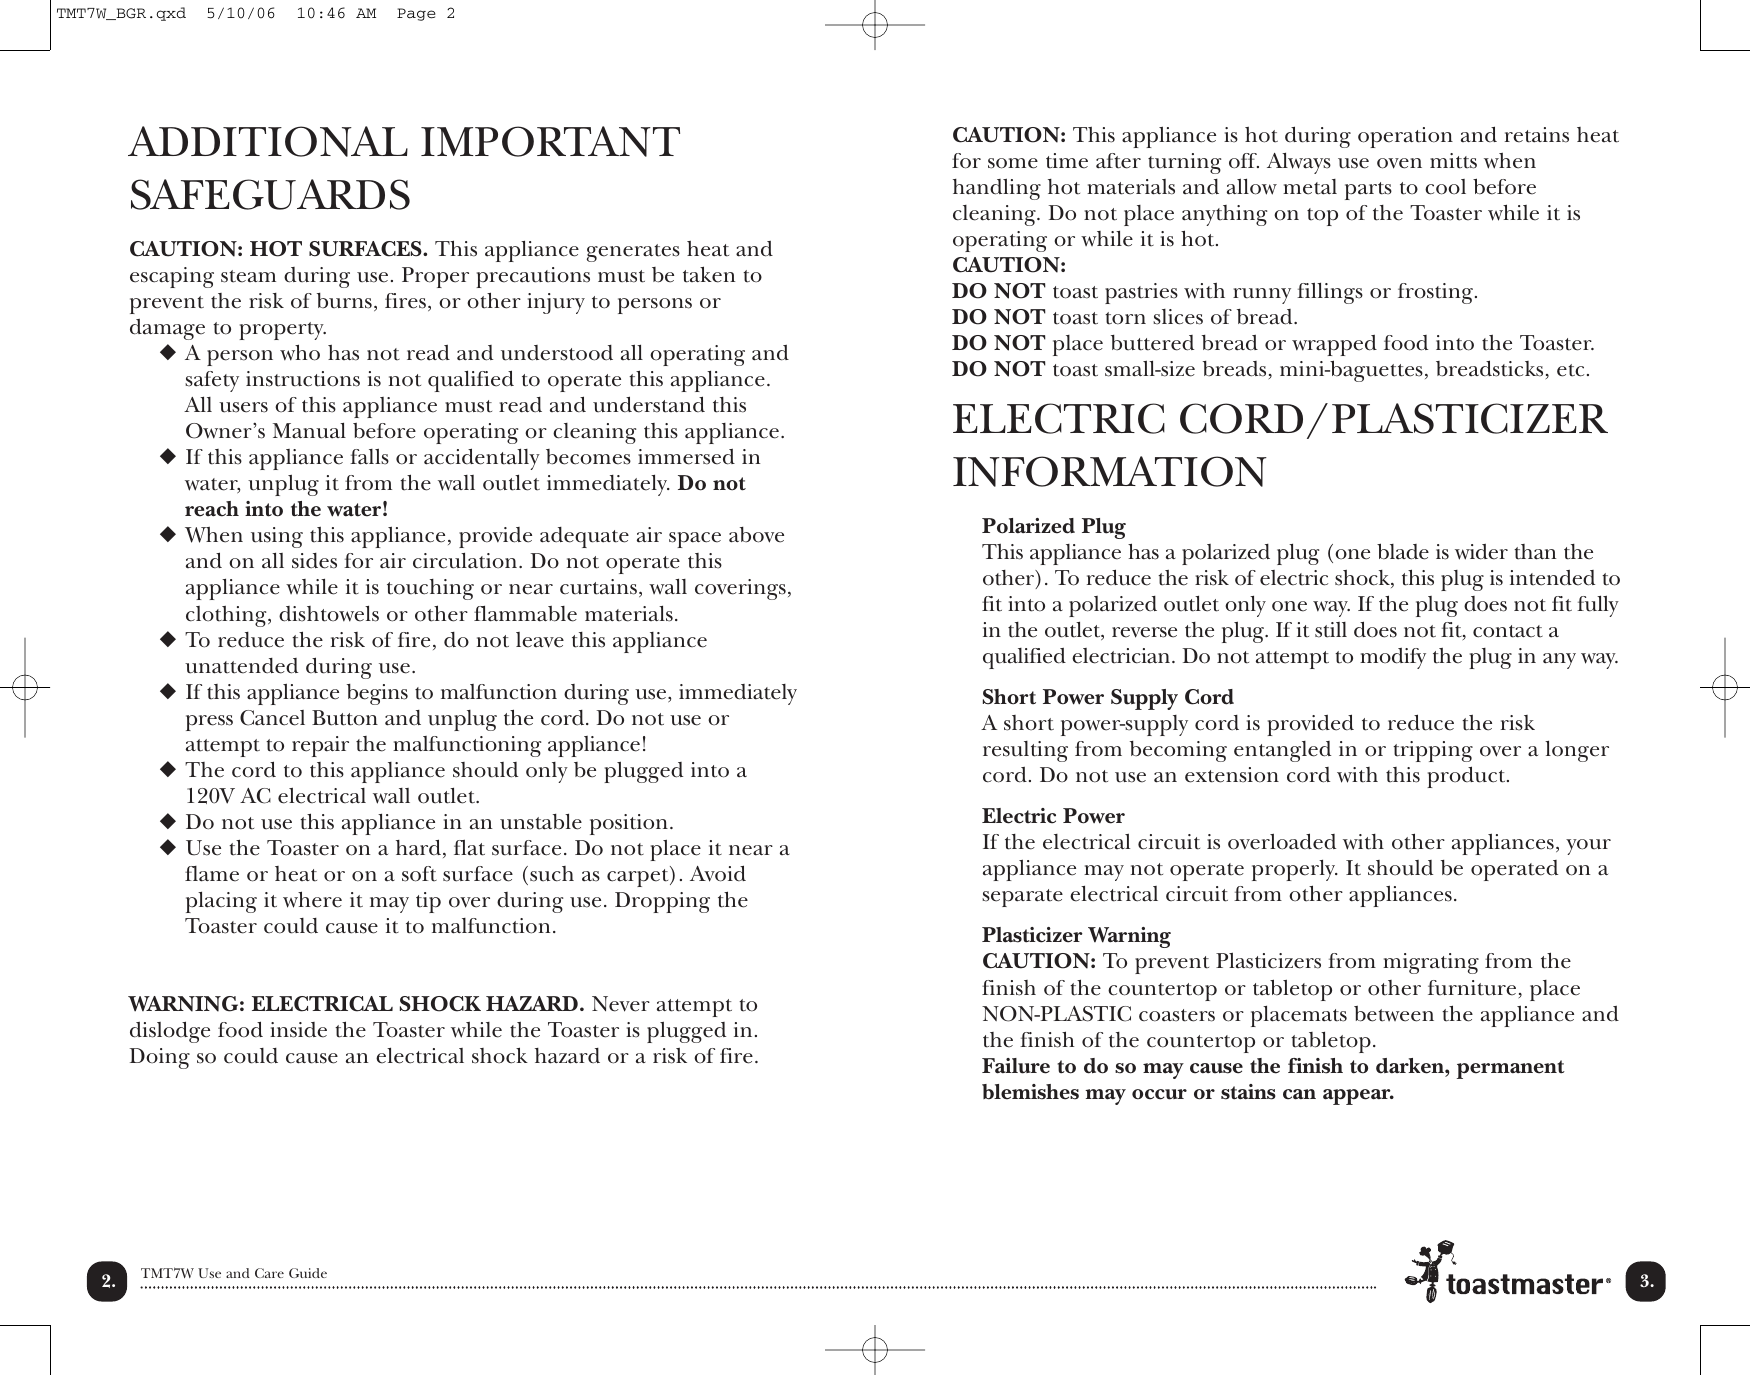 Page 3 of 12 - Toastmaster Toastmaster-Tmt7W-Users-Manual- T2050 Manual  Toastmaster-tmt7w-users-manual